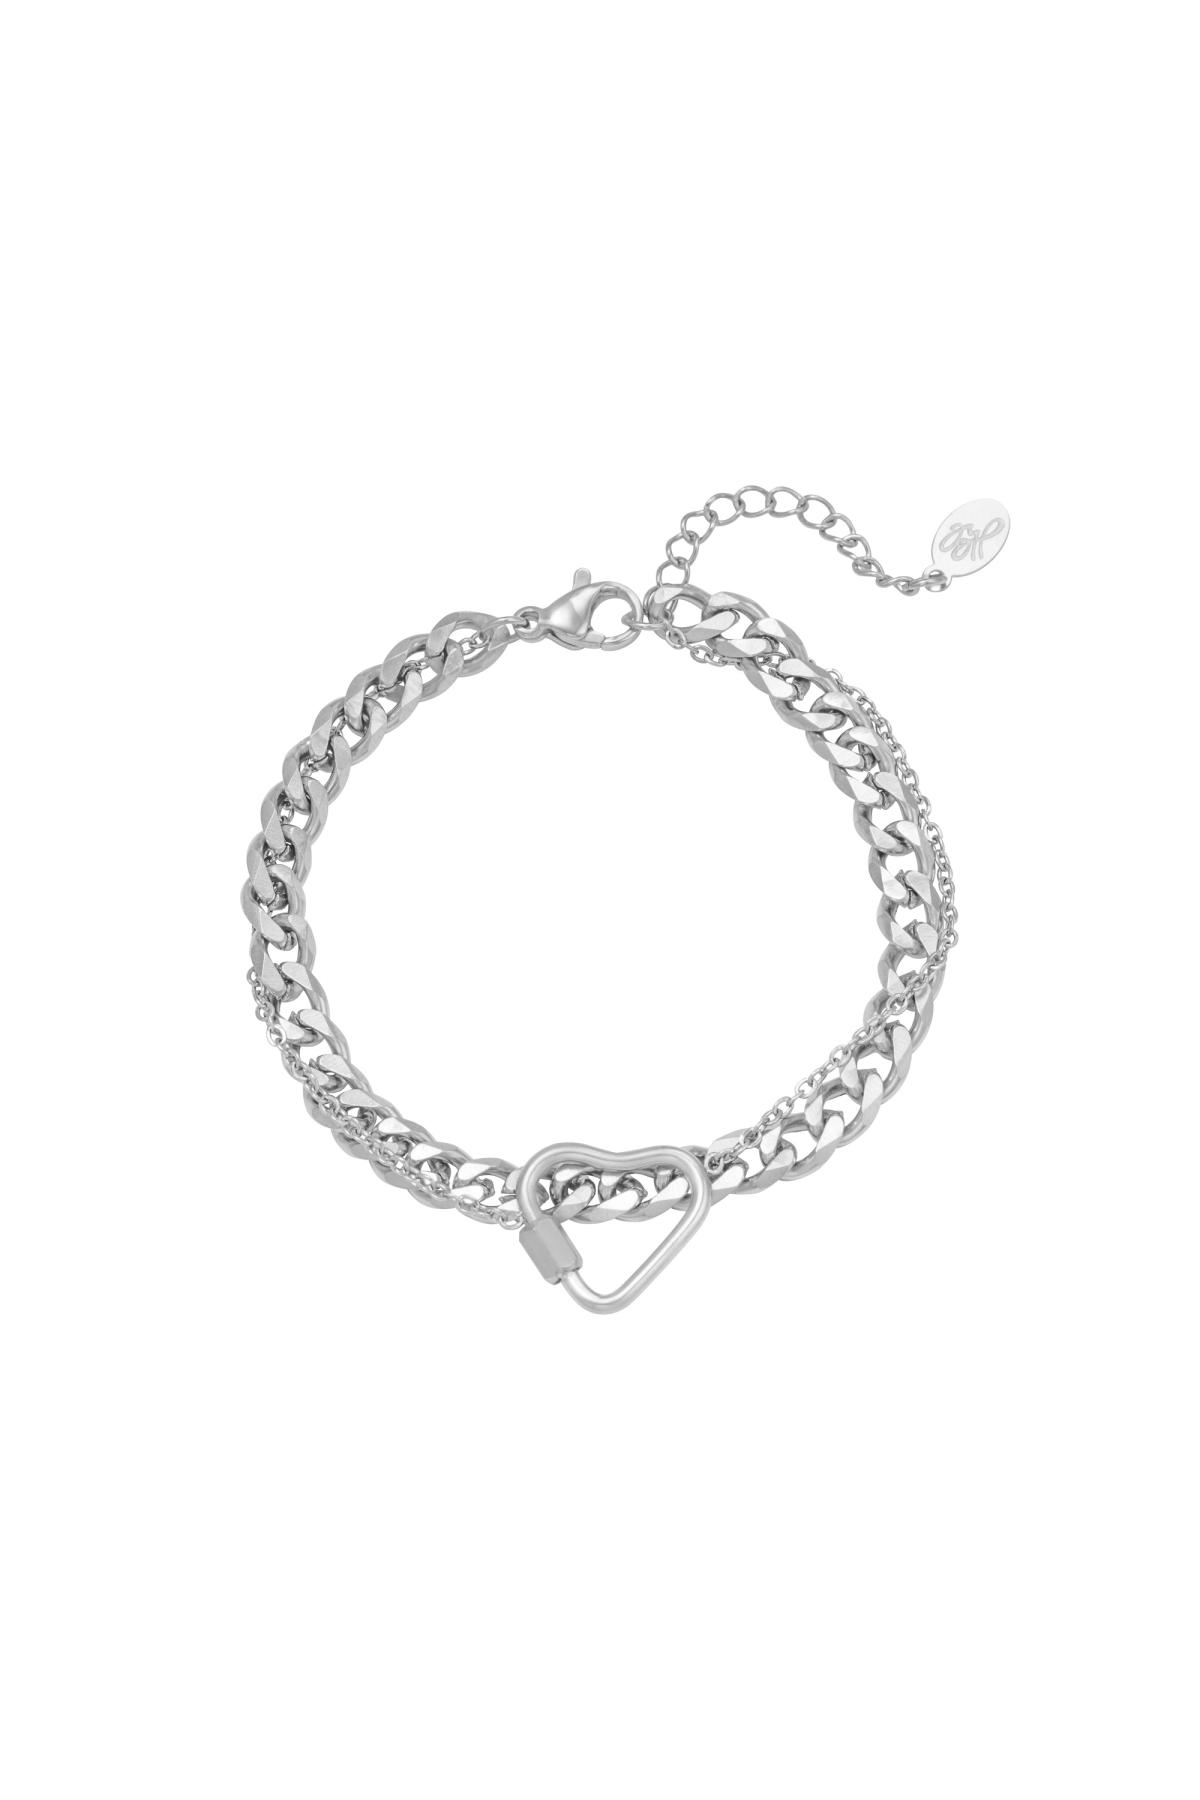 Armband Chained Heart Silber Edelstahl